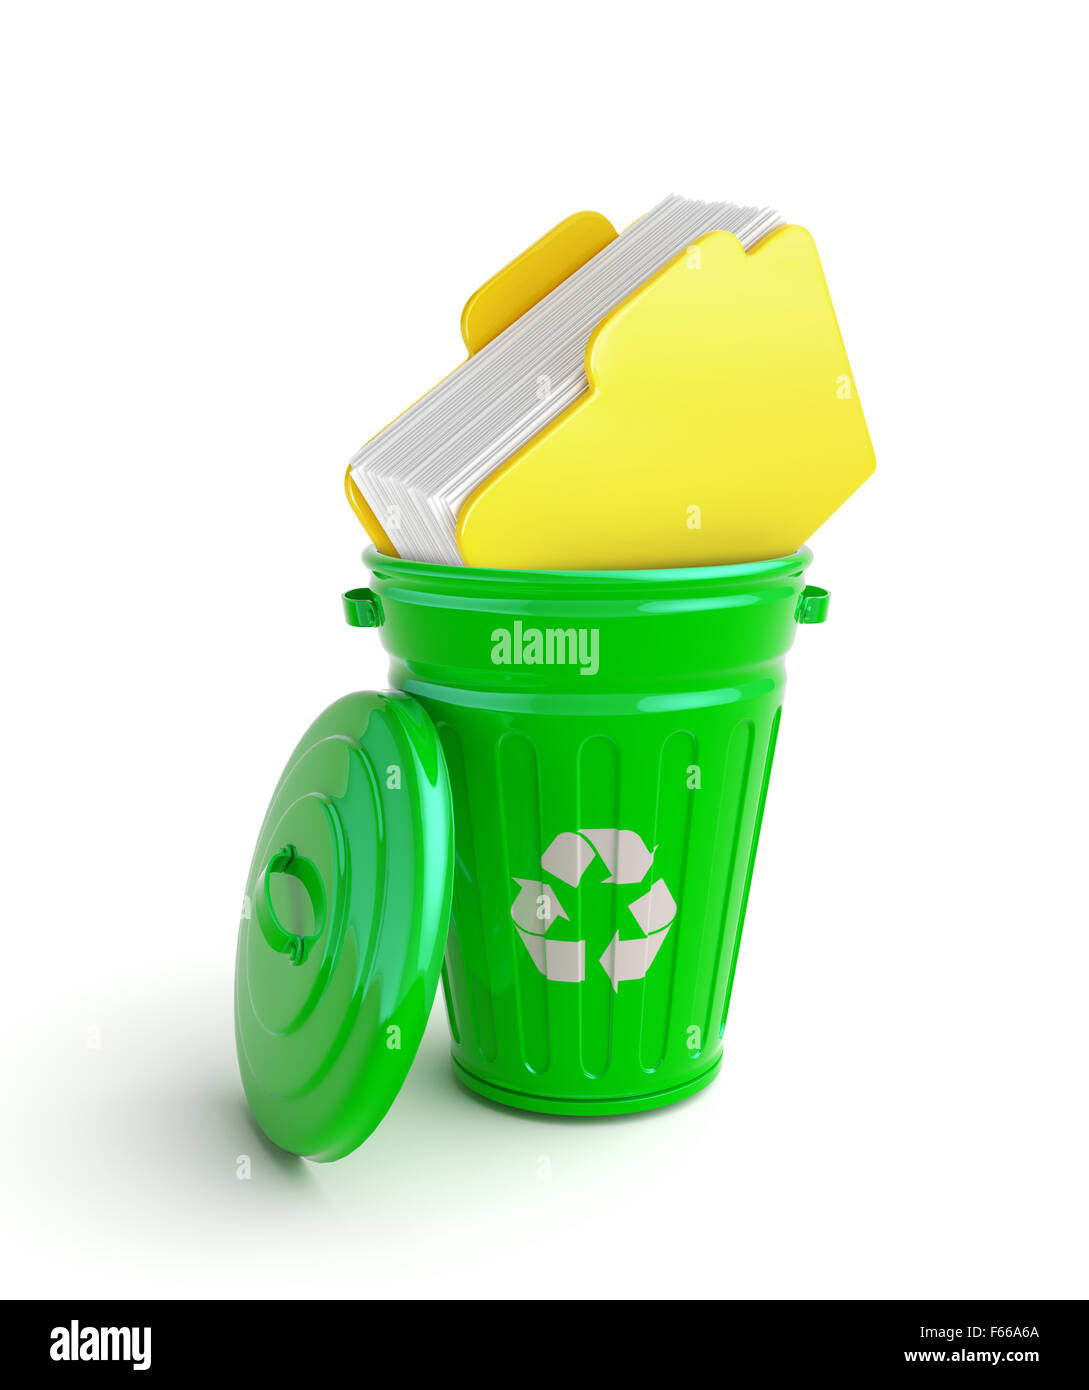 Green garbage bin with documents Stock Photo